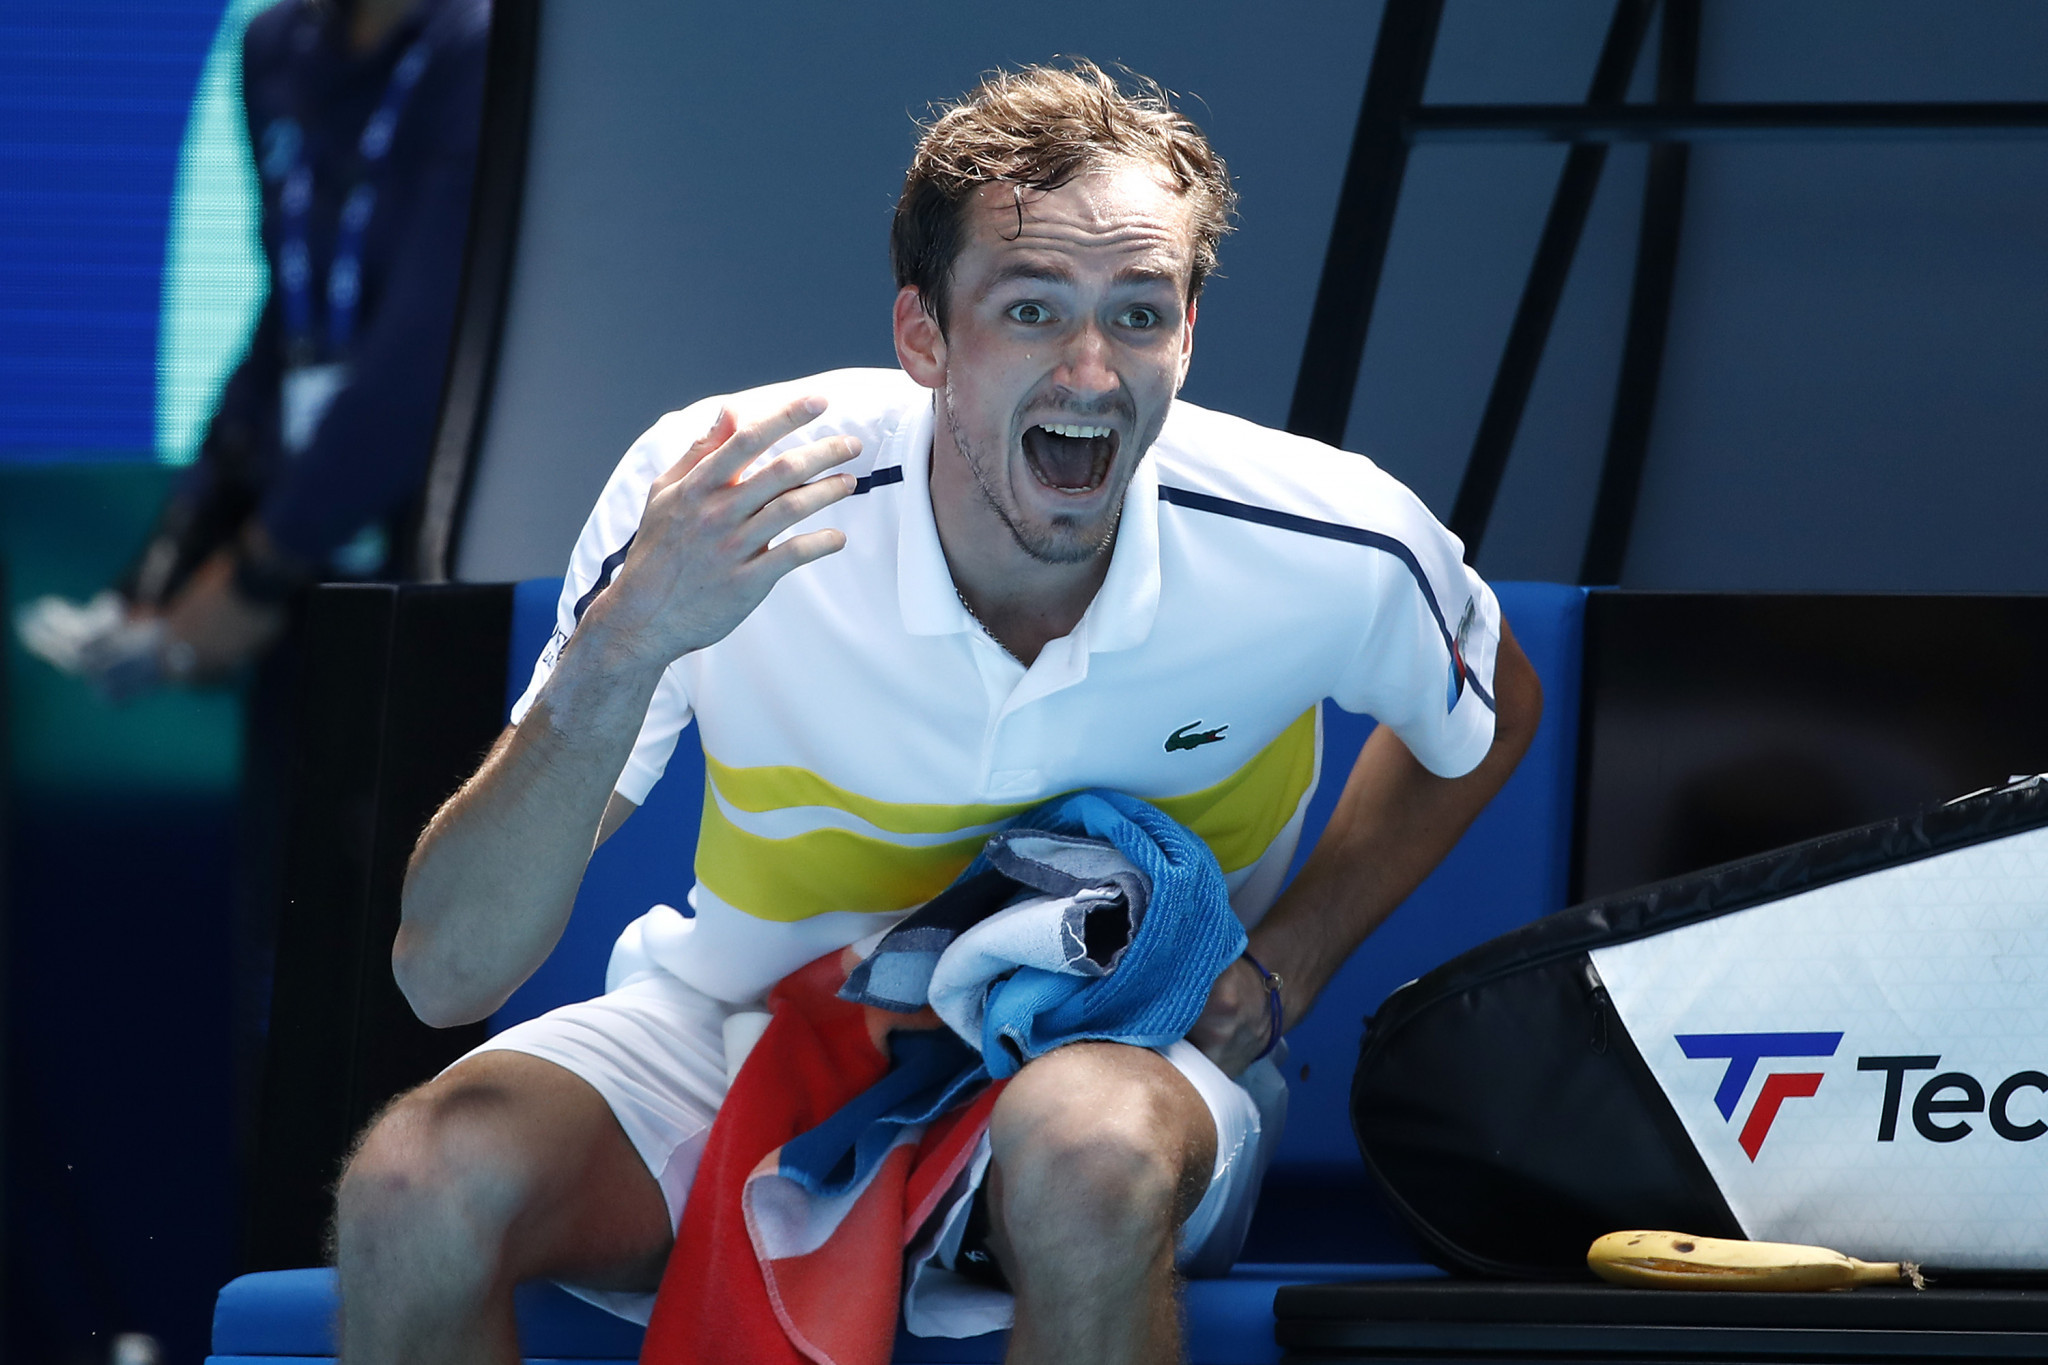 Medvedev's coach walks out during five-set victory at Australian Open